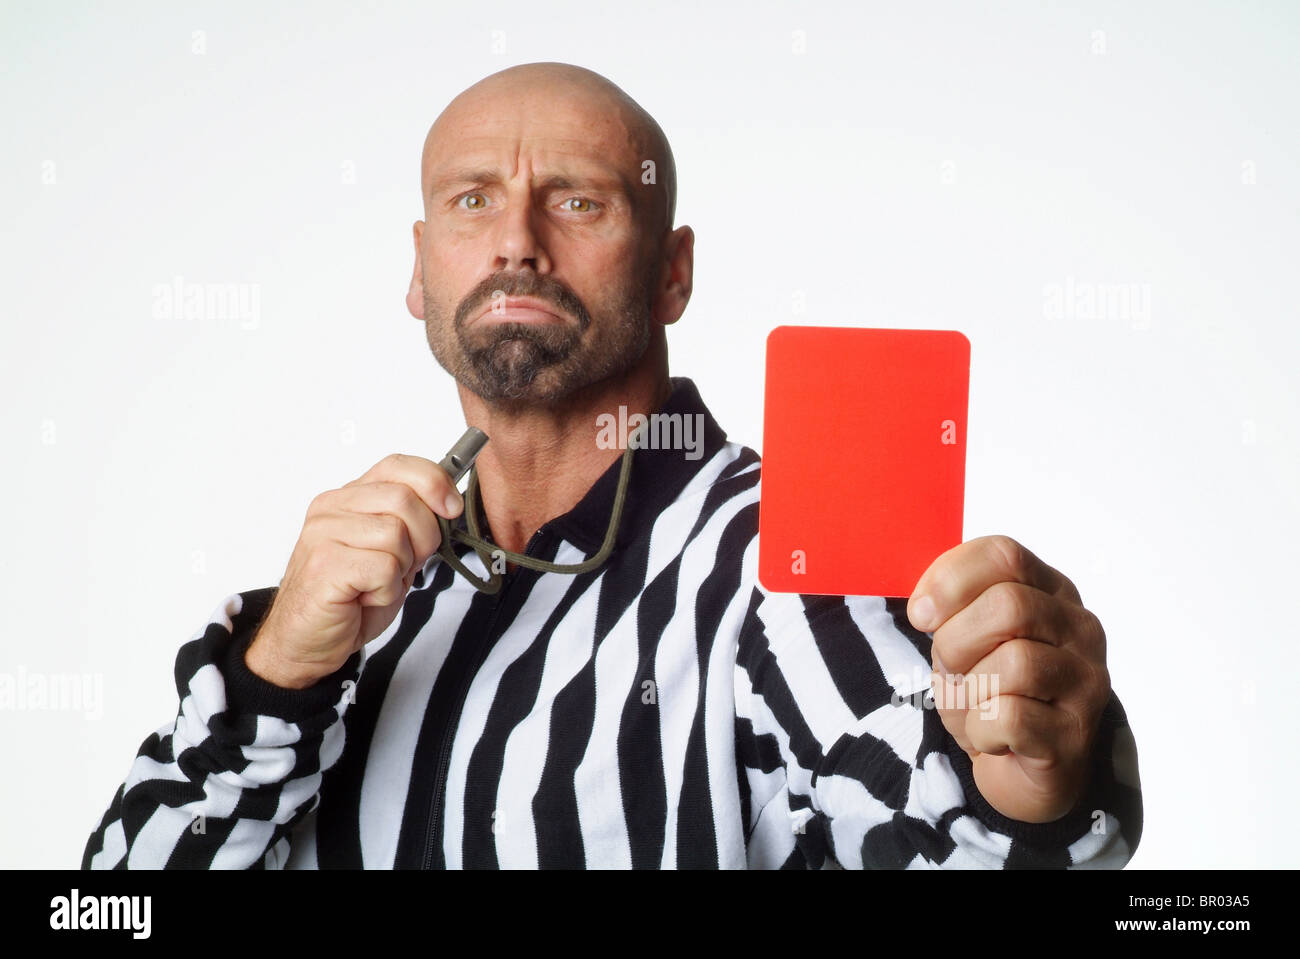 A soccer referee showing a red card Stock Photo